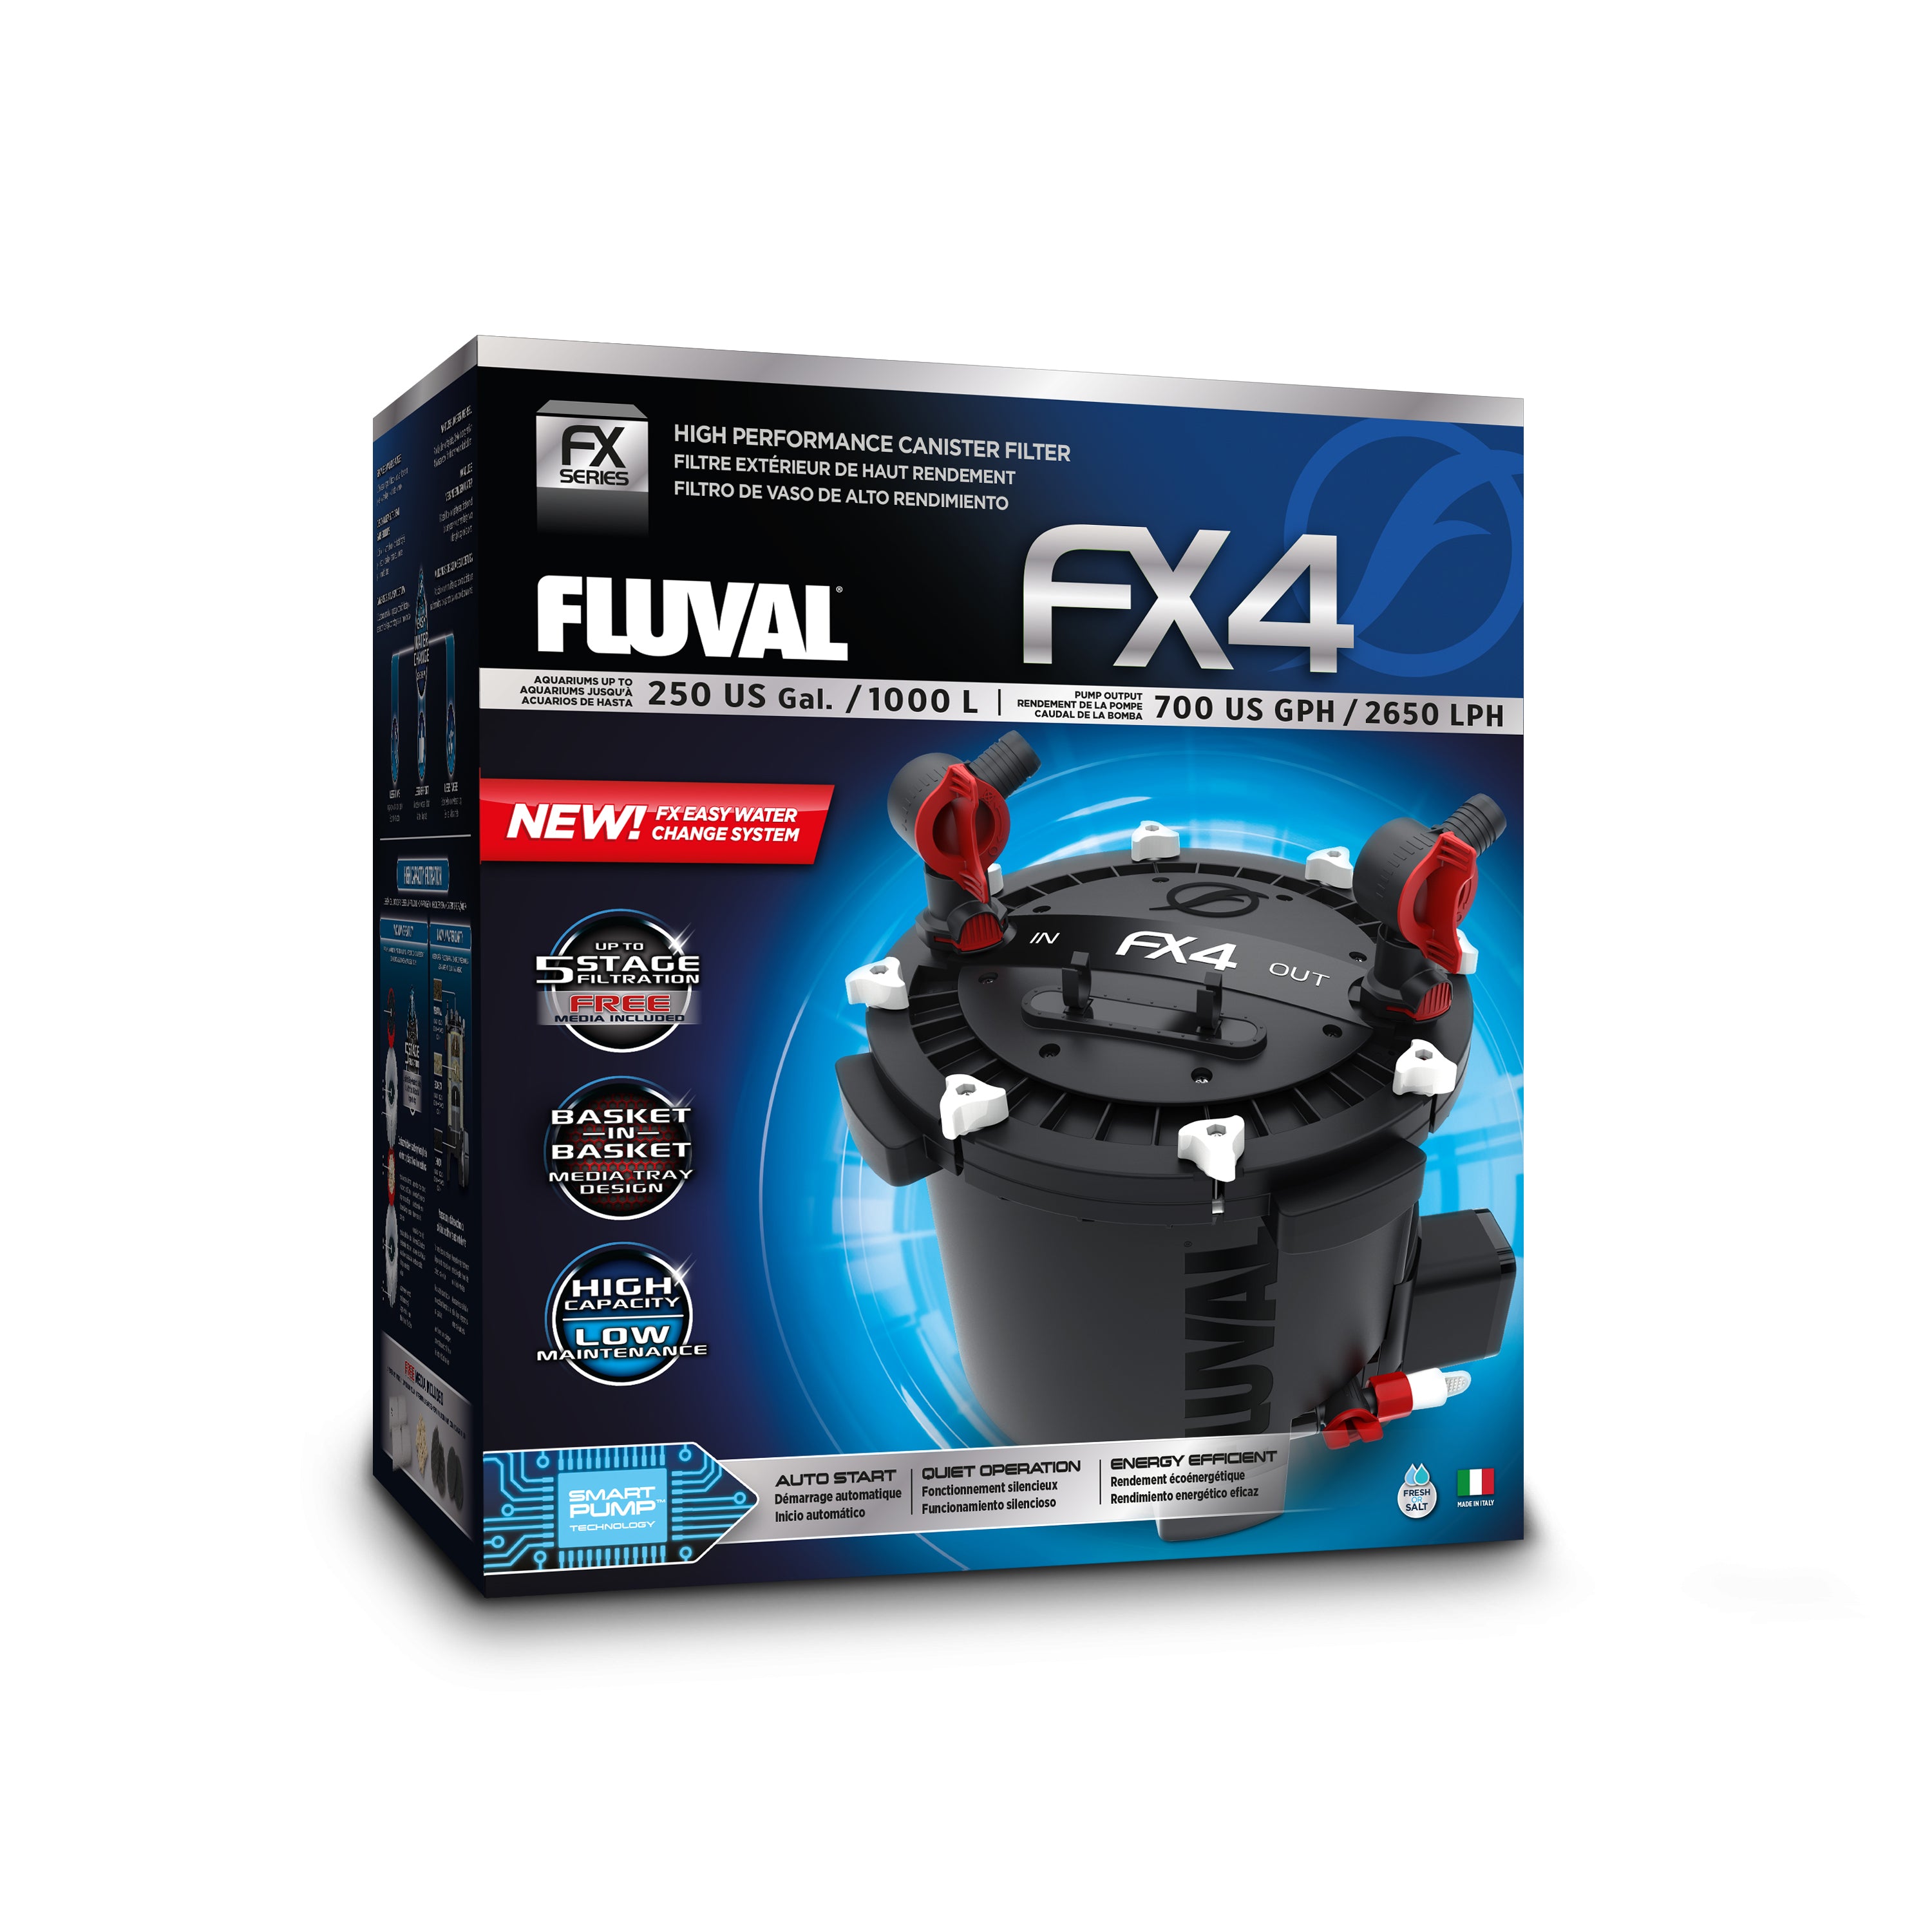 Fluval FX4 High Performance Canister Filter - up to 1000 L (250 US gal)